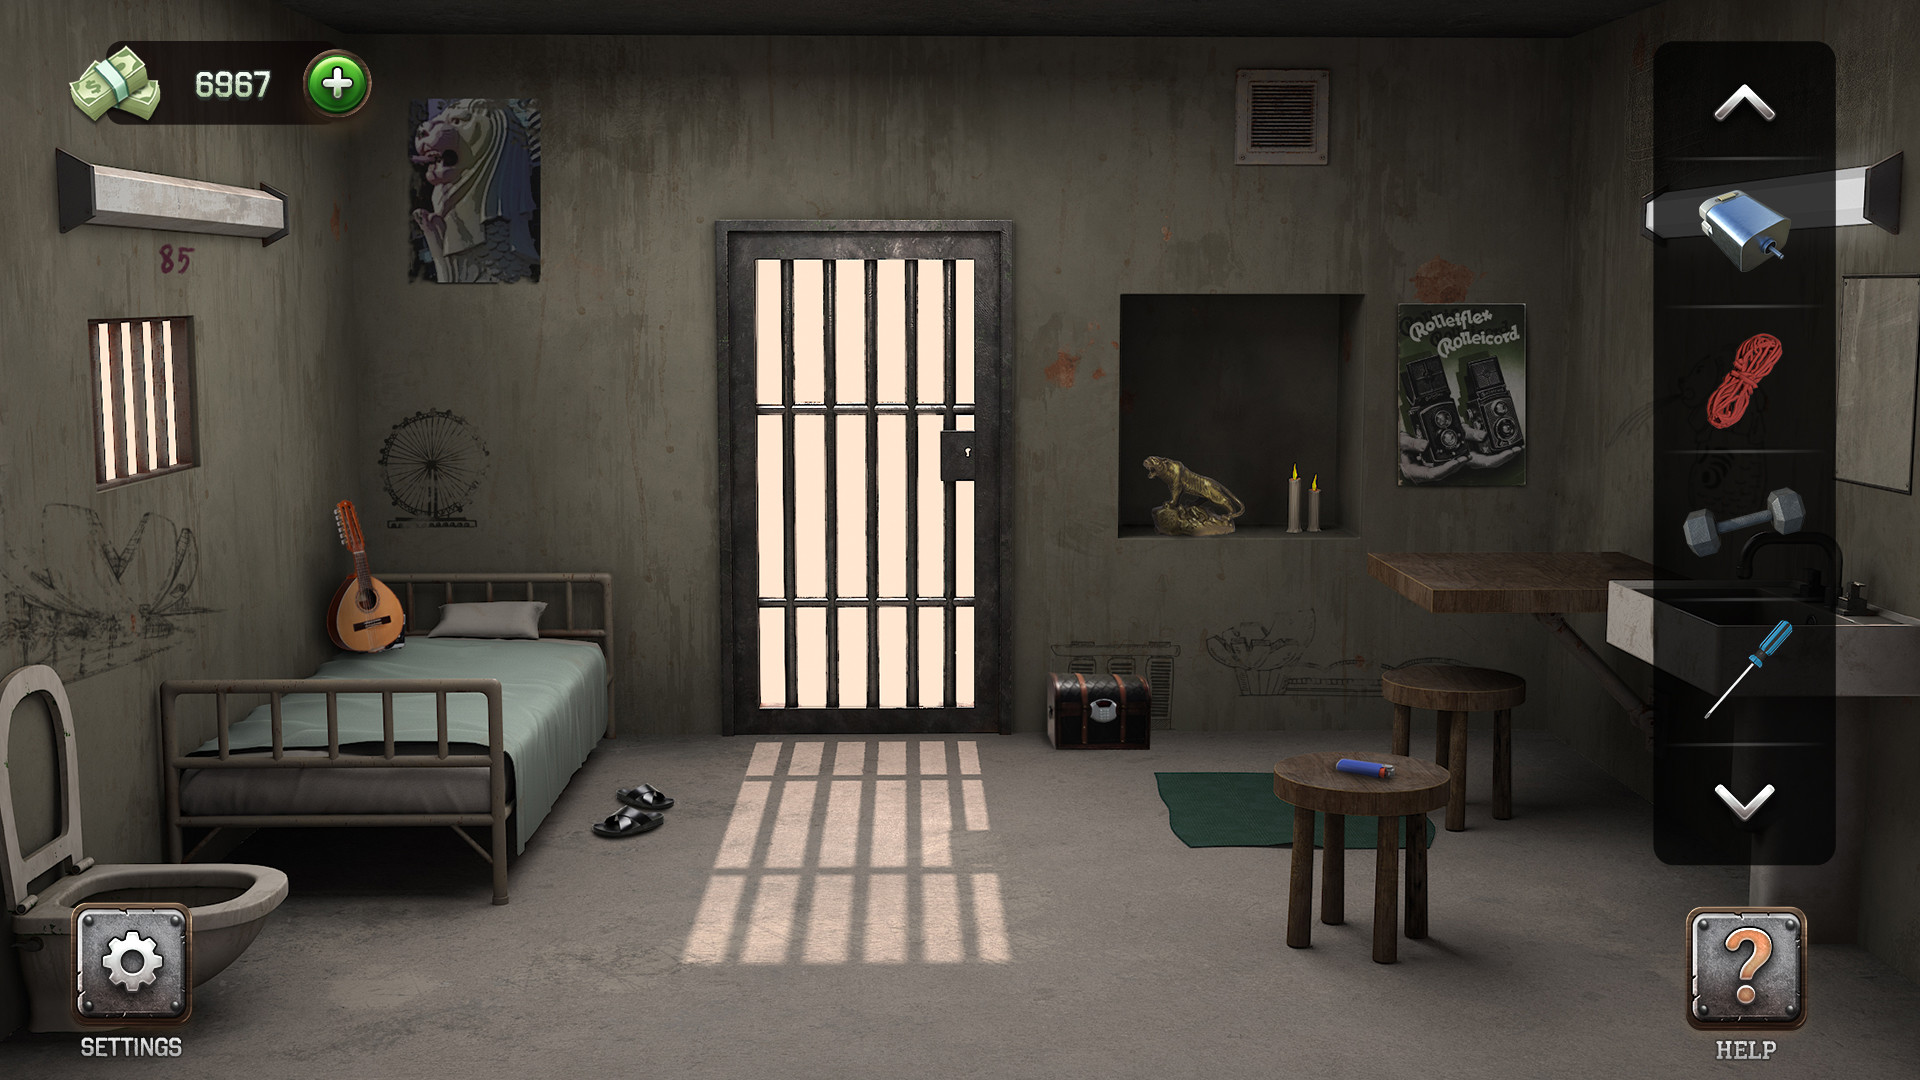 Escaping the Prison - Play Online + 100% For Free Now - Games